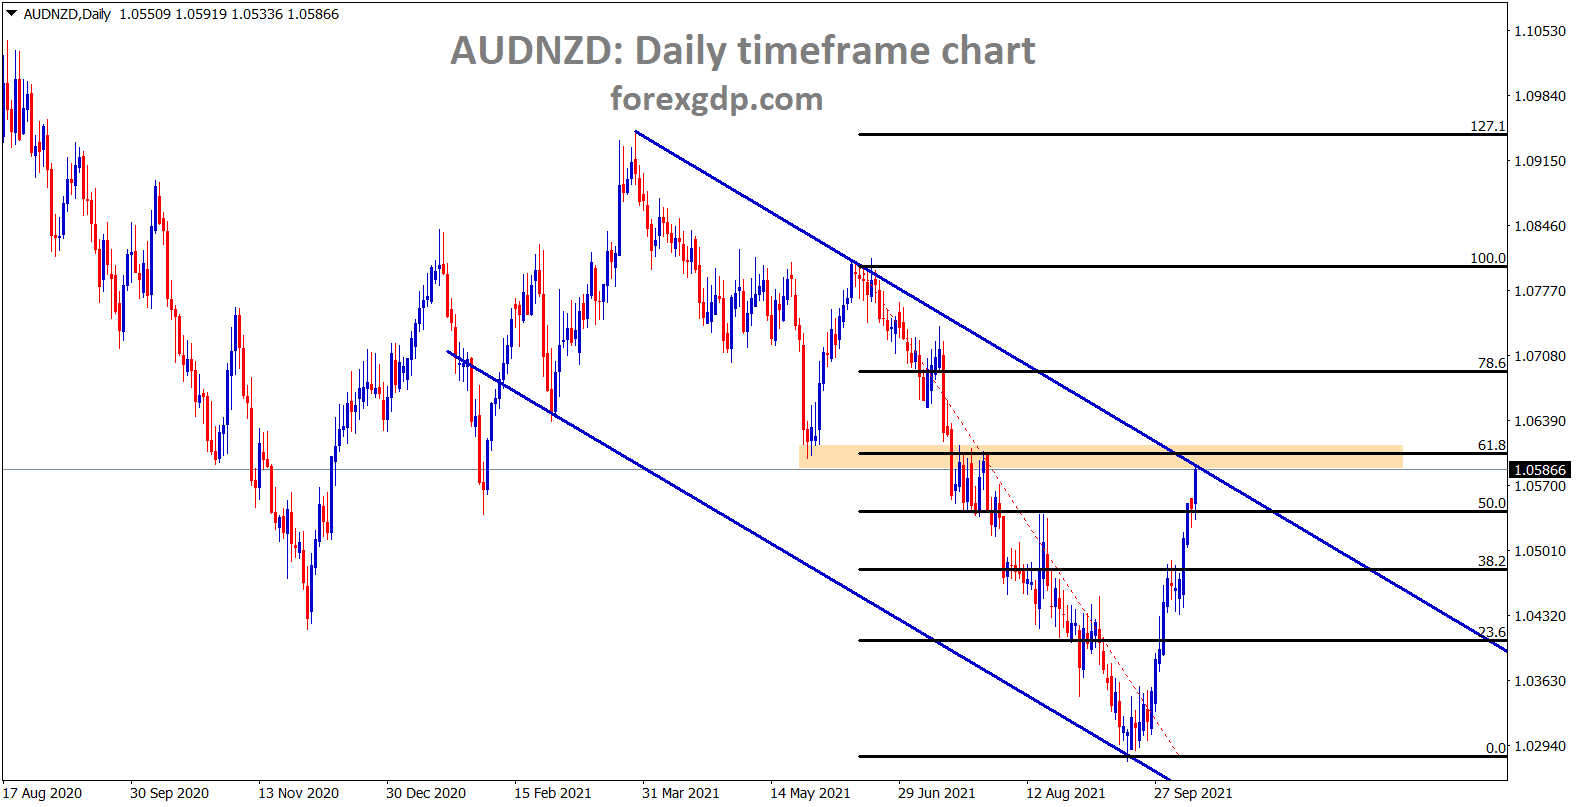 AUDNZD hits the lower high area of the downtrend line and its near to 61.8 retracementt level